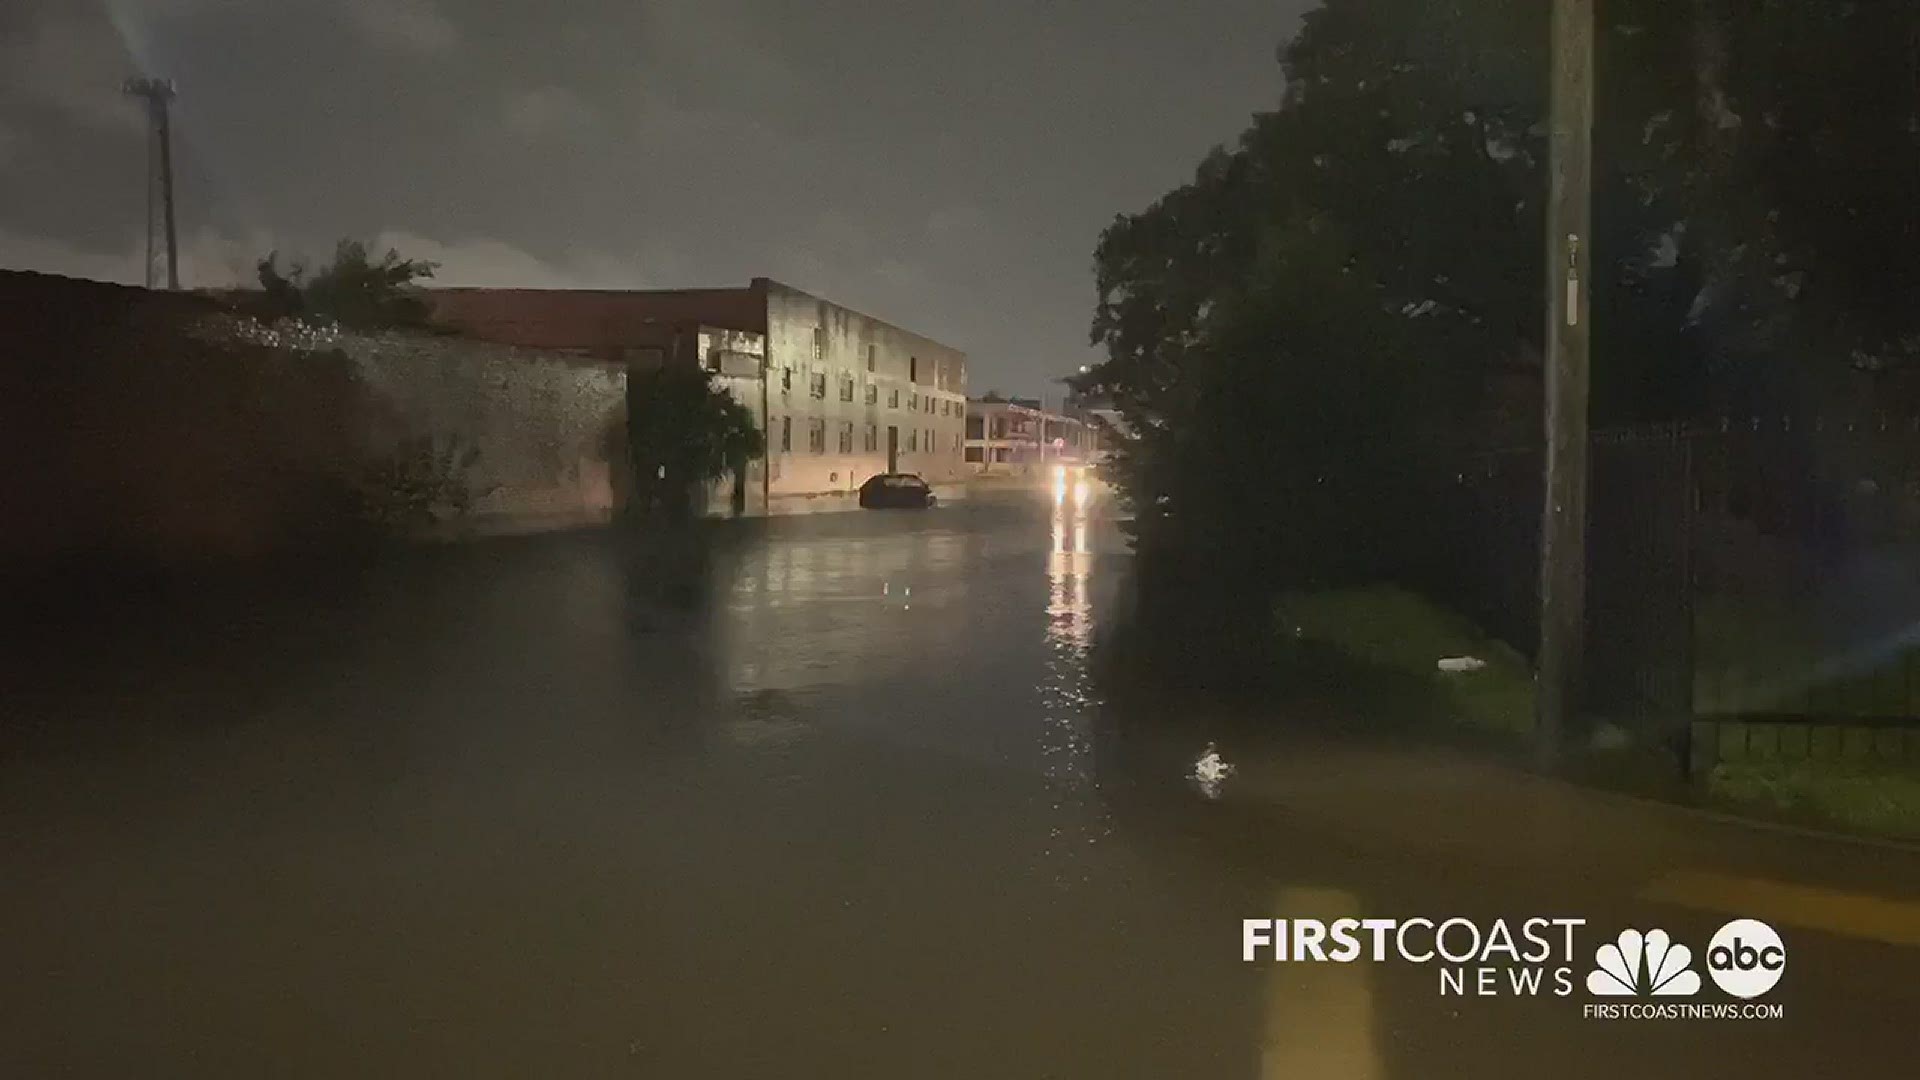 The rescue happened in the Hogan's Creek neighborhood after heavy downpour prompted a flash flood warning for parts of Jacksonville.